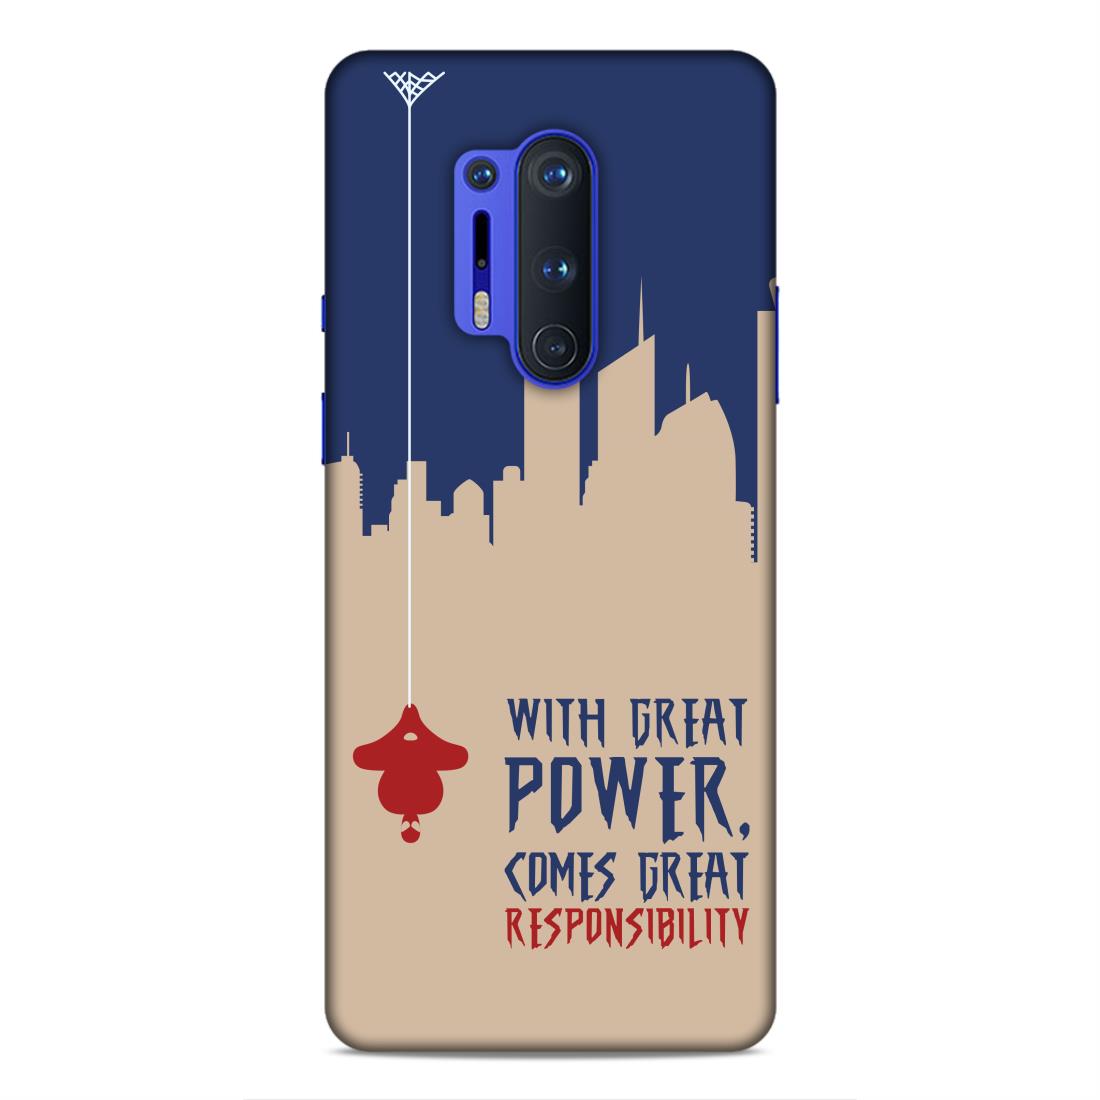 Great Power Comes Great Responsibility Hard Back Case For OnePlus 8 Pro